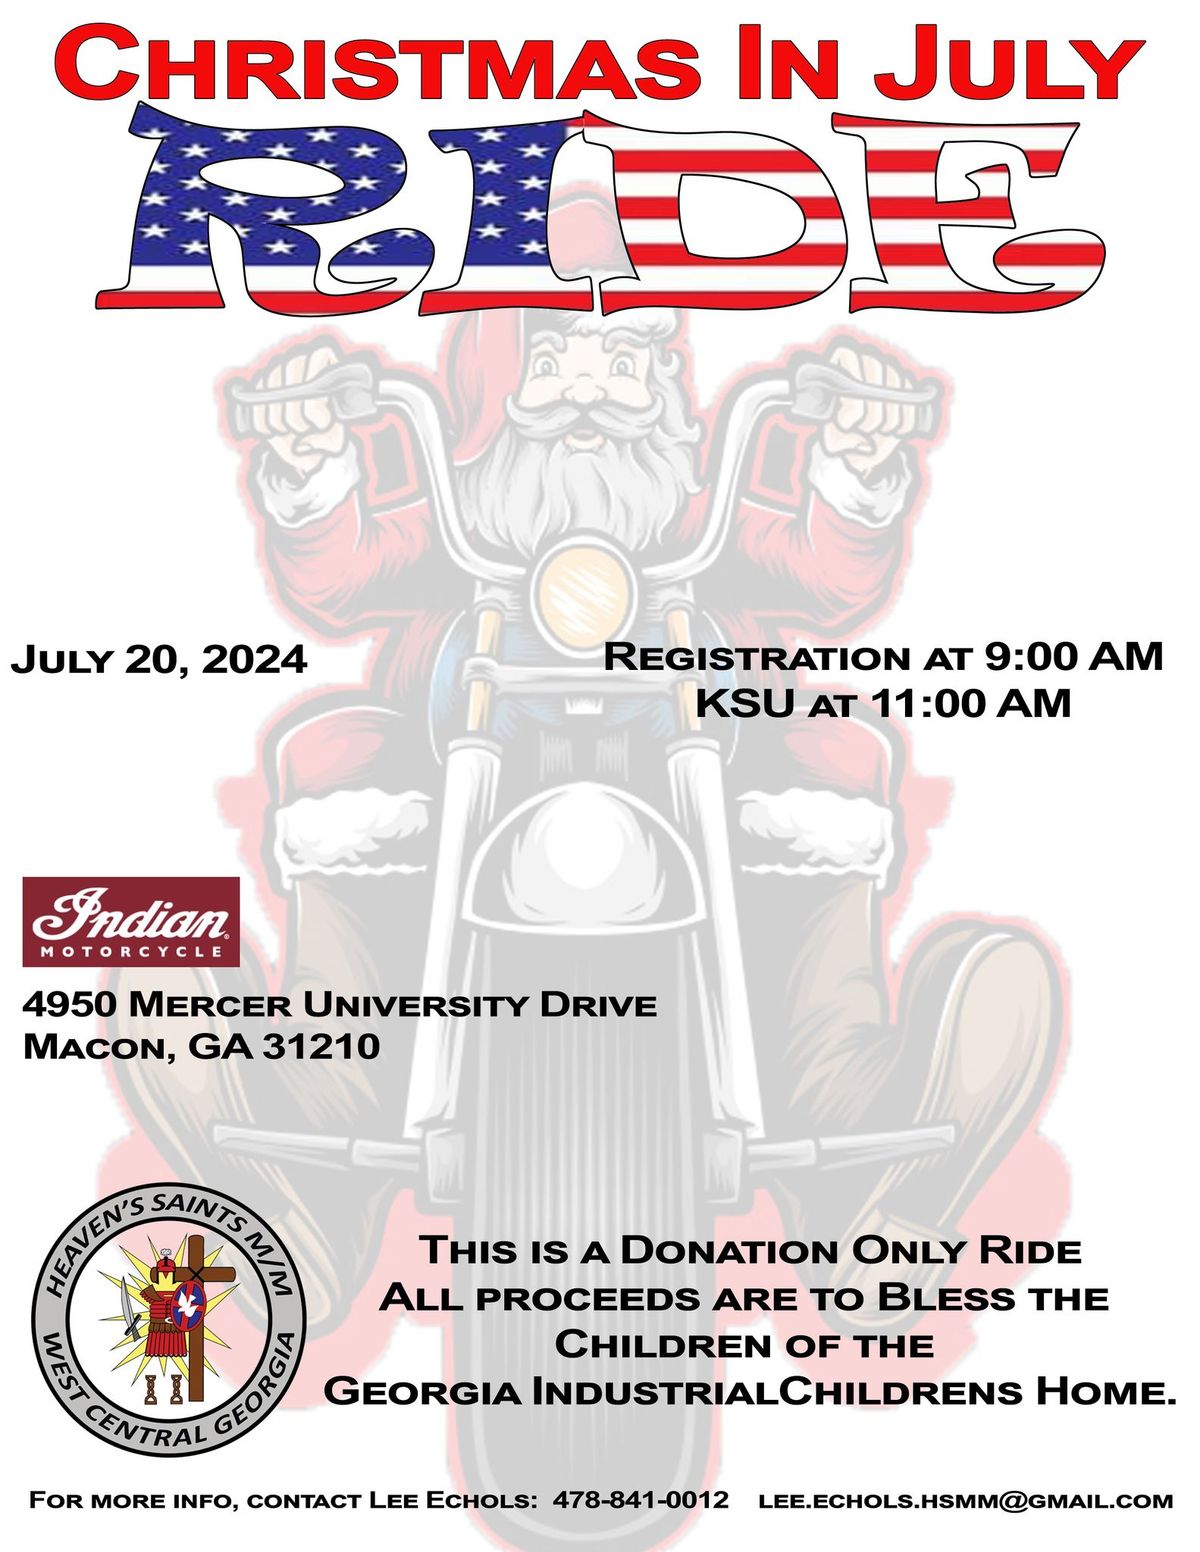 Heaven's Saints Motorcycle Ministry 2024 Christmas In July Ride